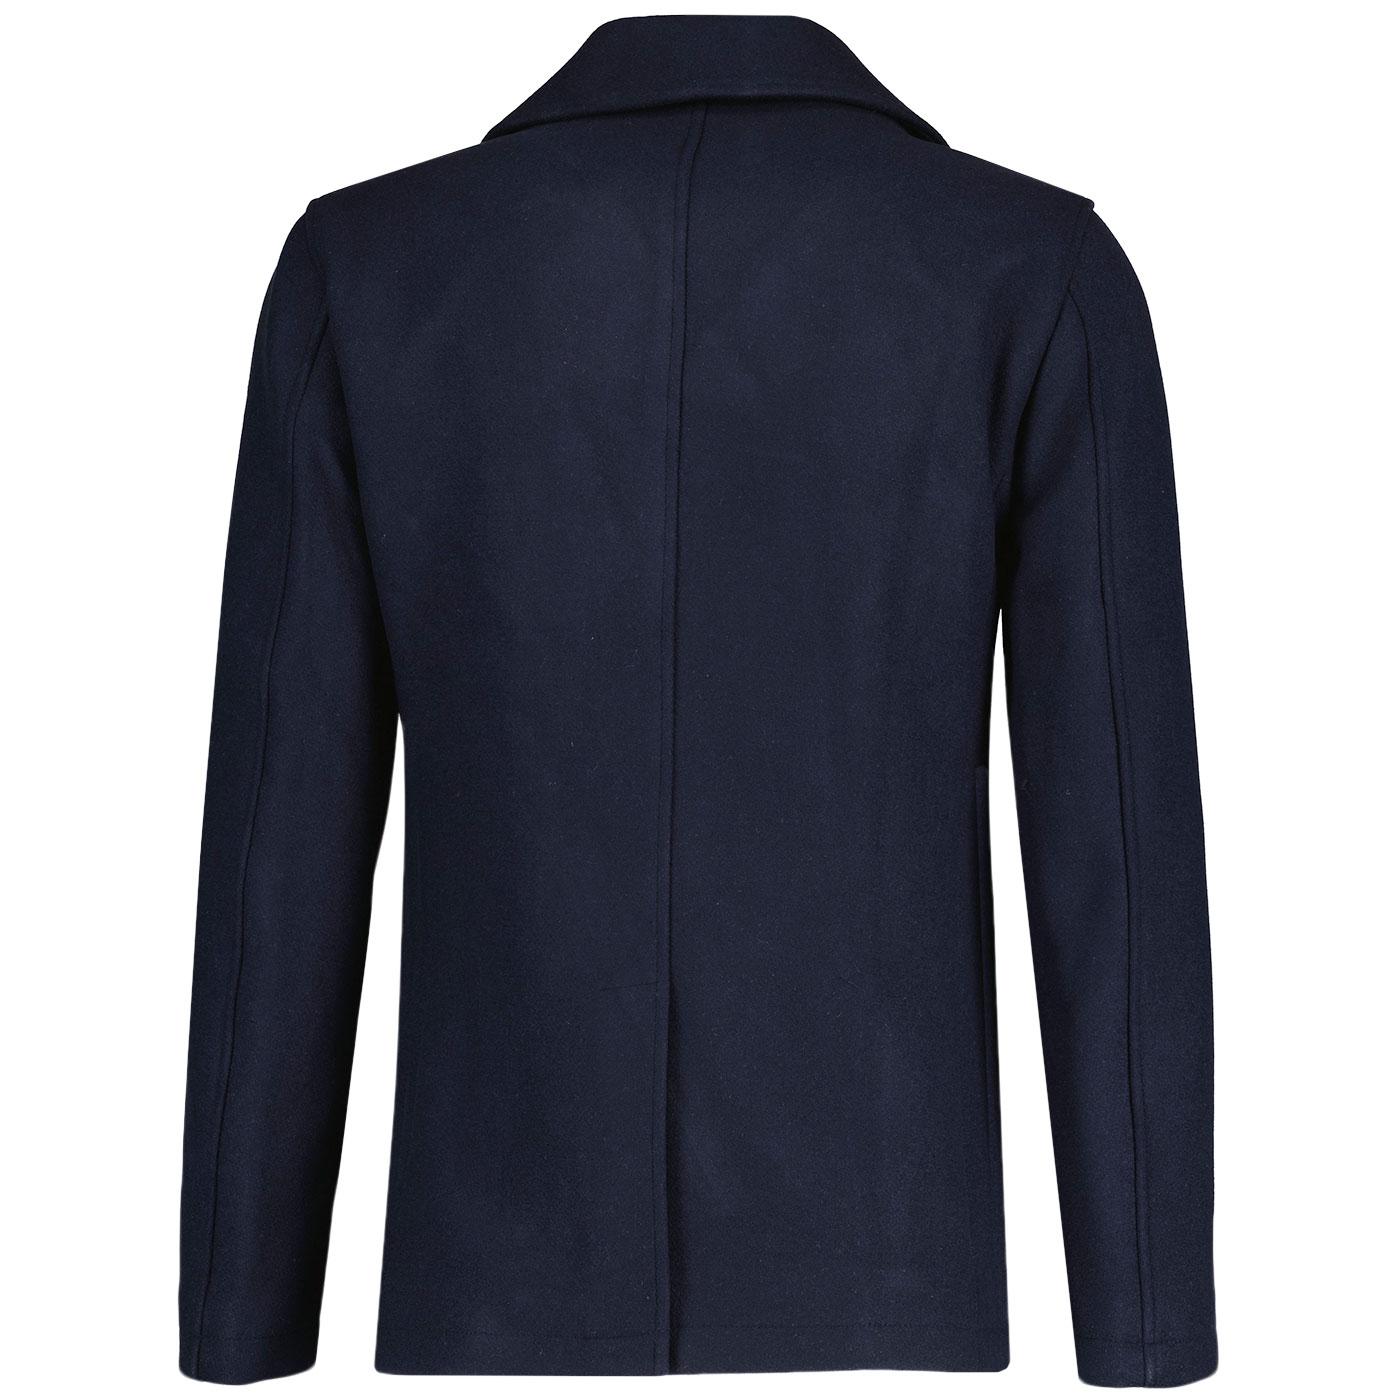 French Connection Double Breasted Mod Peacoat in Navy Blue